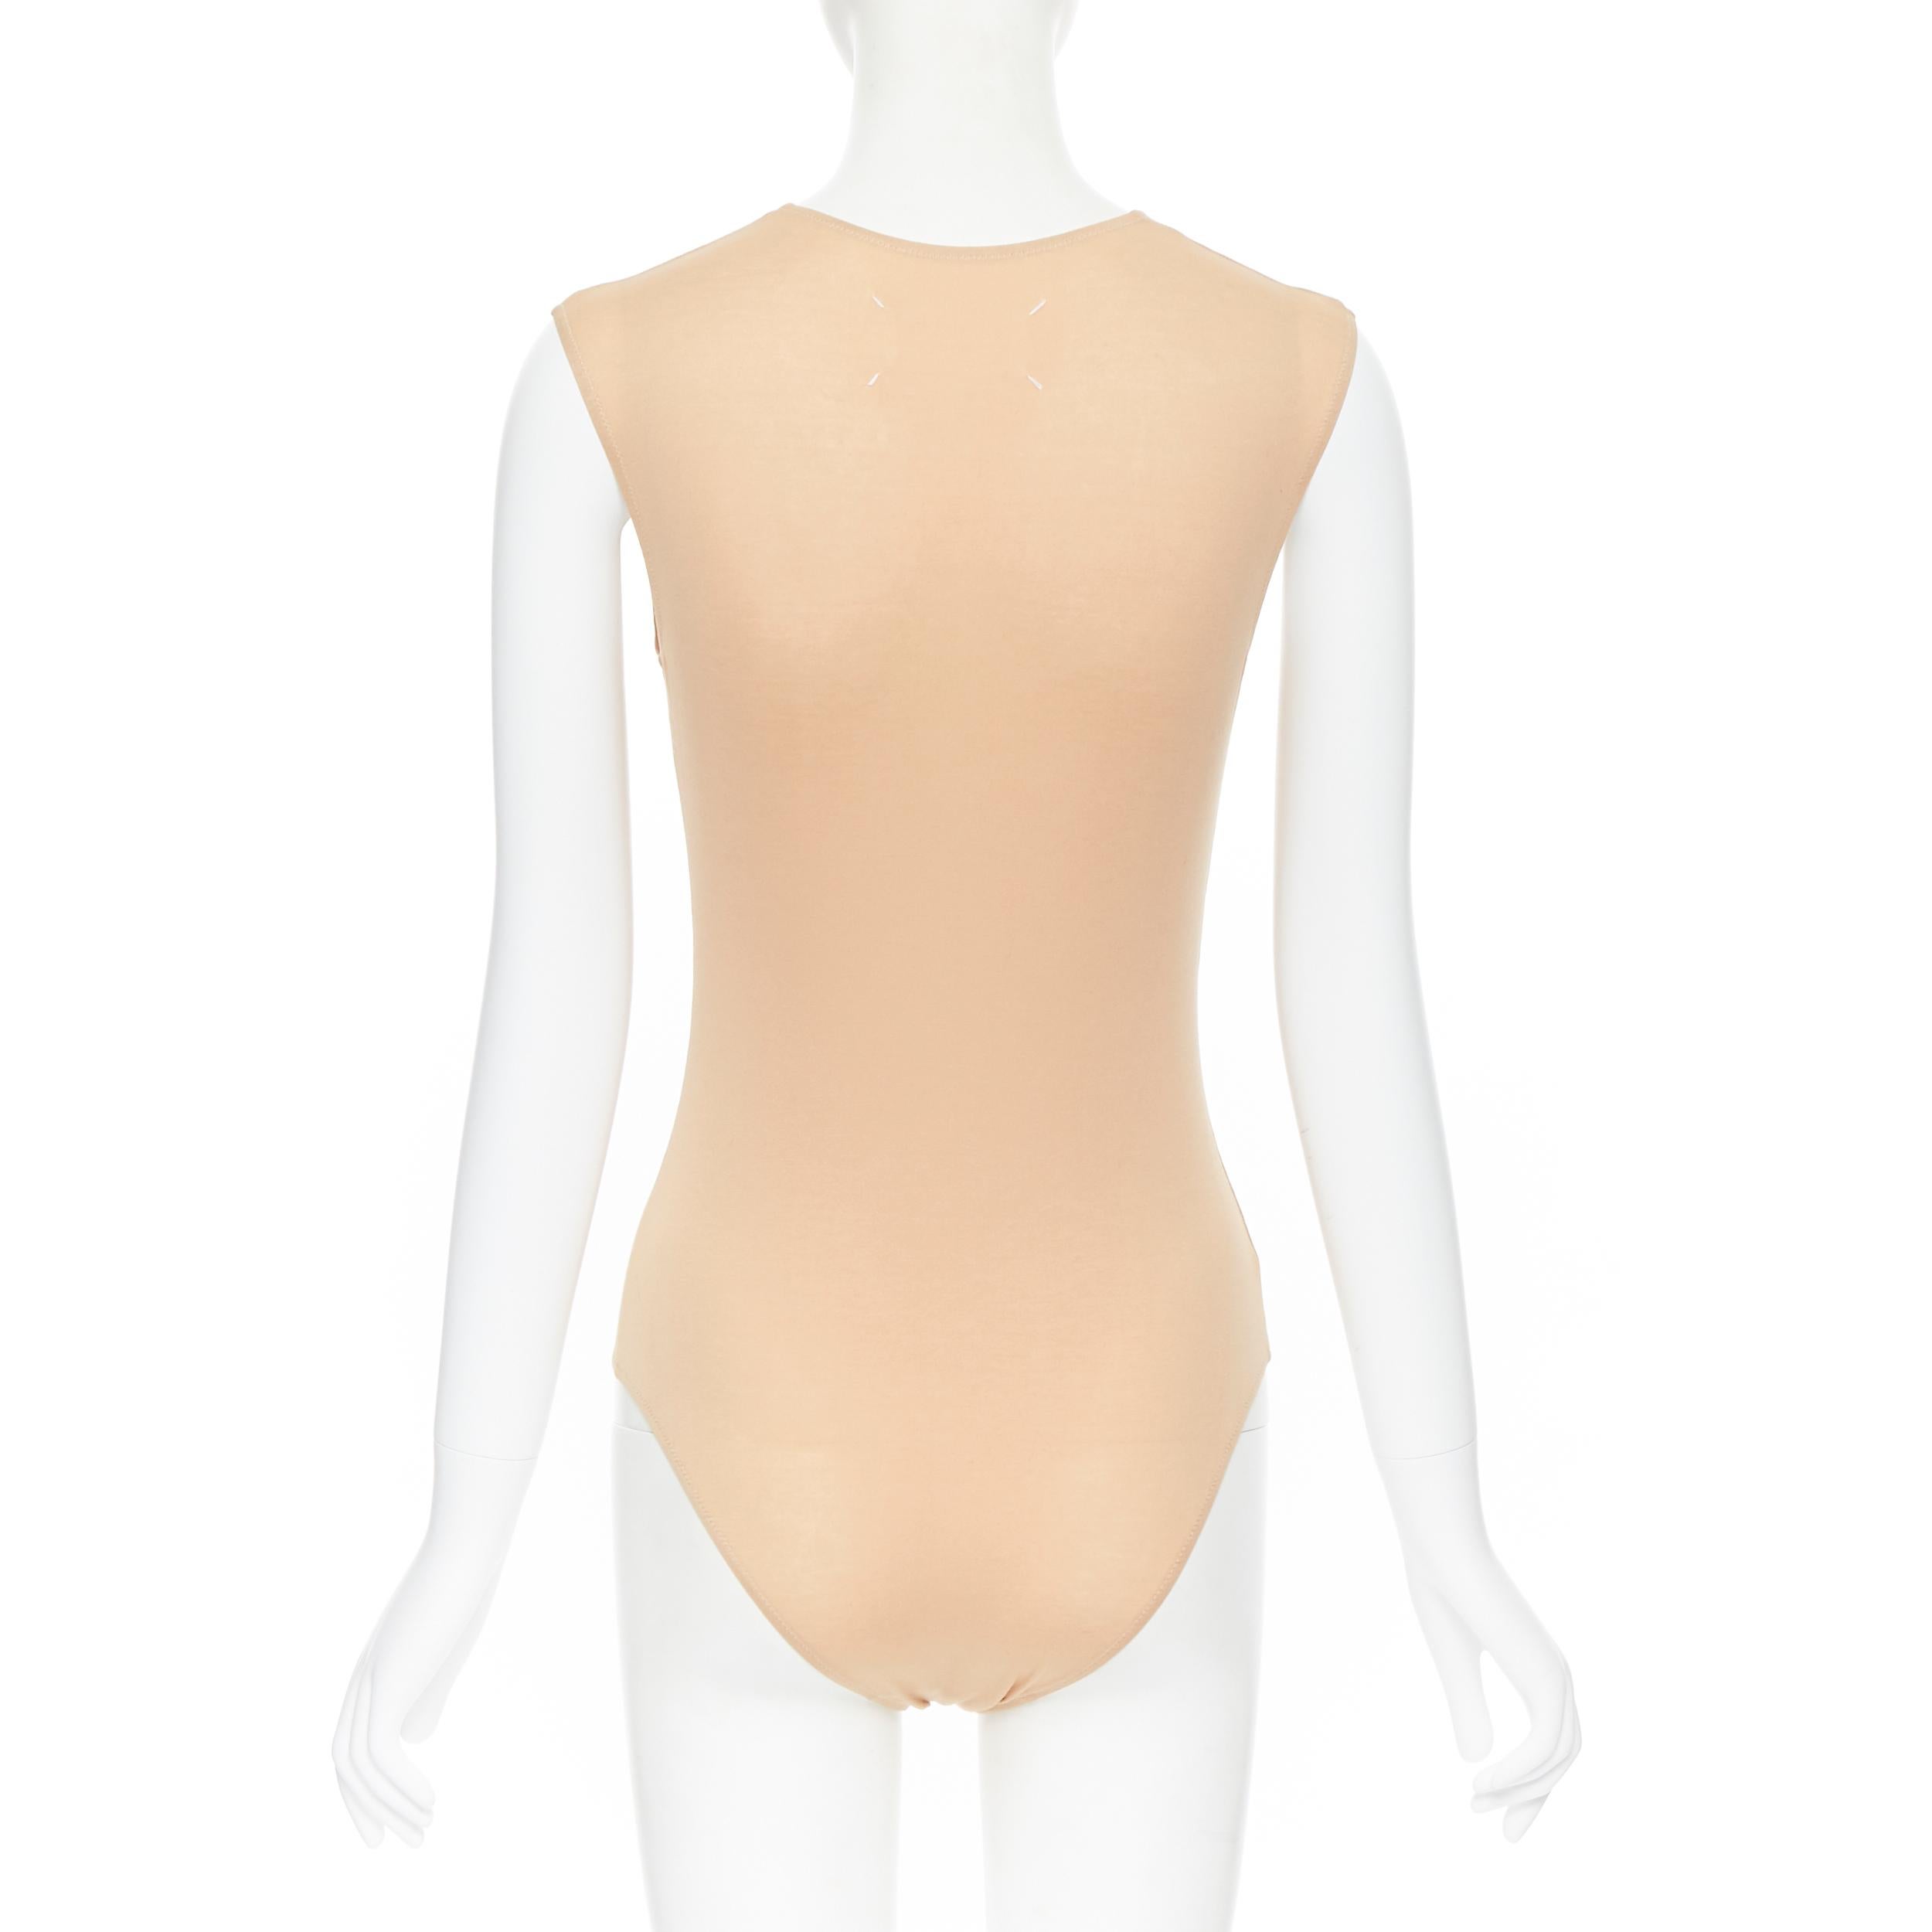 MAISON MARTIN MARGIELA beige nude sleeveless bodysuit bodice top IT42 
Reference: EACN/A00096 
Brand: Maison Margiela 
Material: Cotton 
Color: Beige 
Pattern: Solid 
Closure: Snap 
Extra Detail: Snap button at crotch. 
Made in: Italy